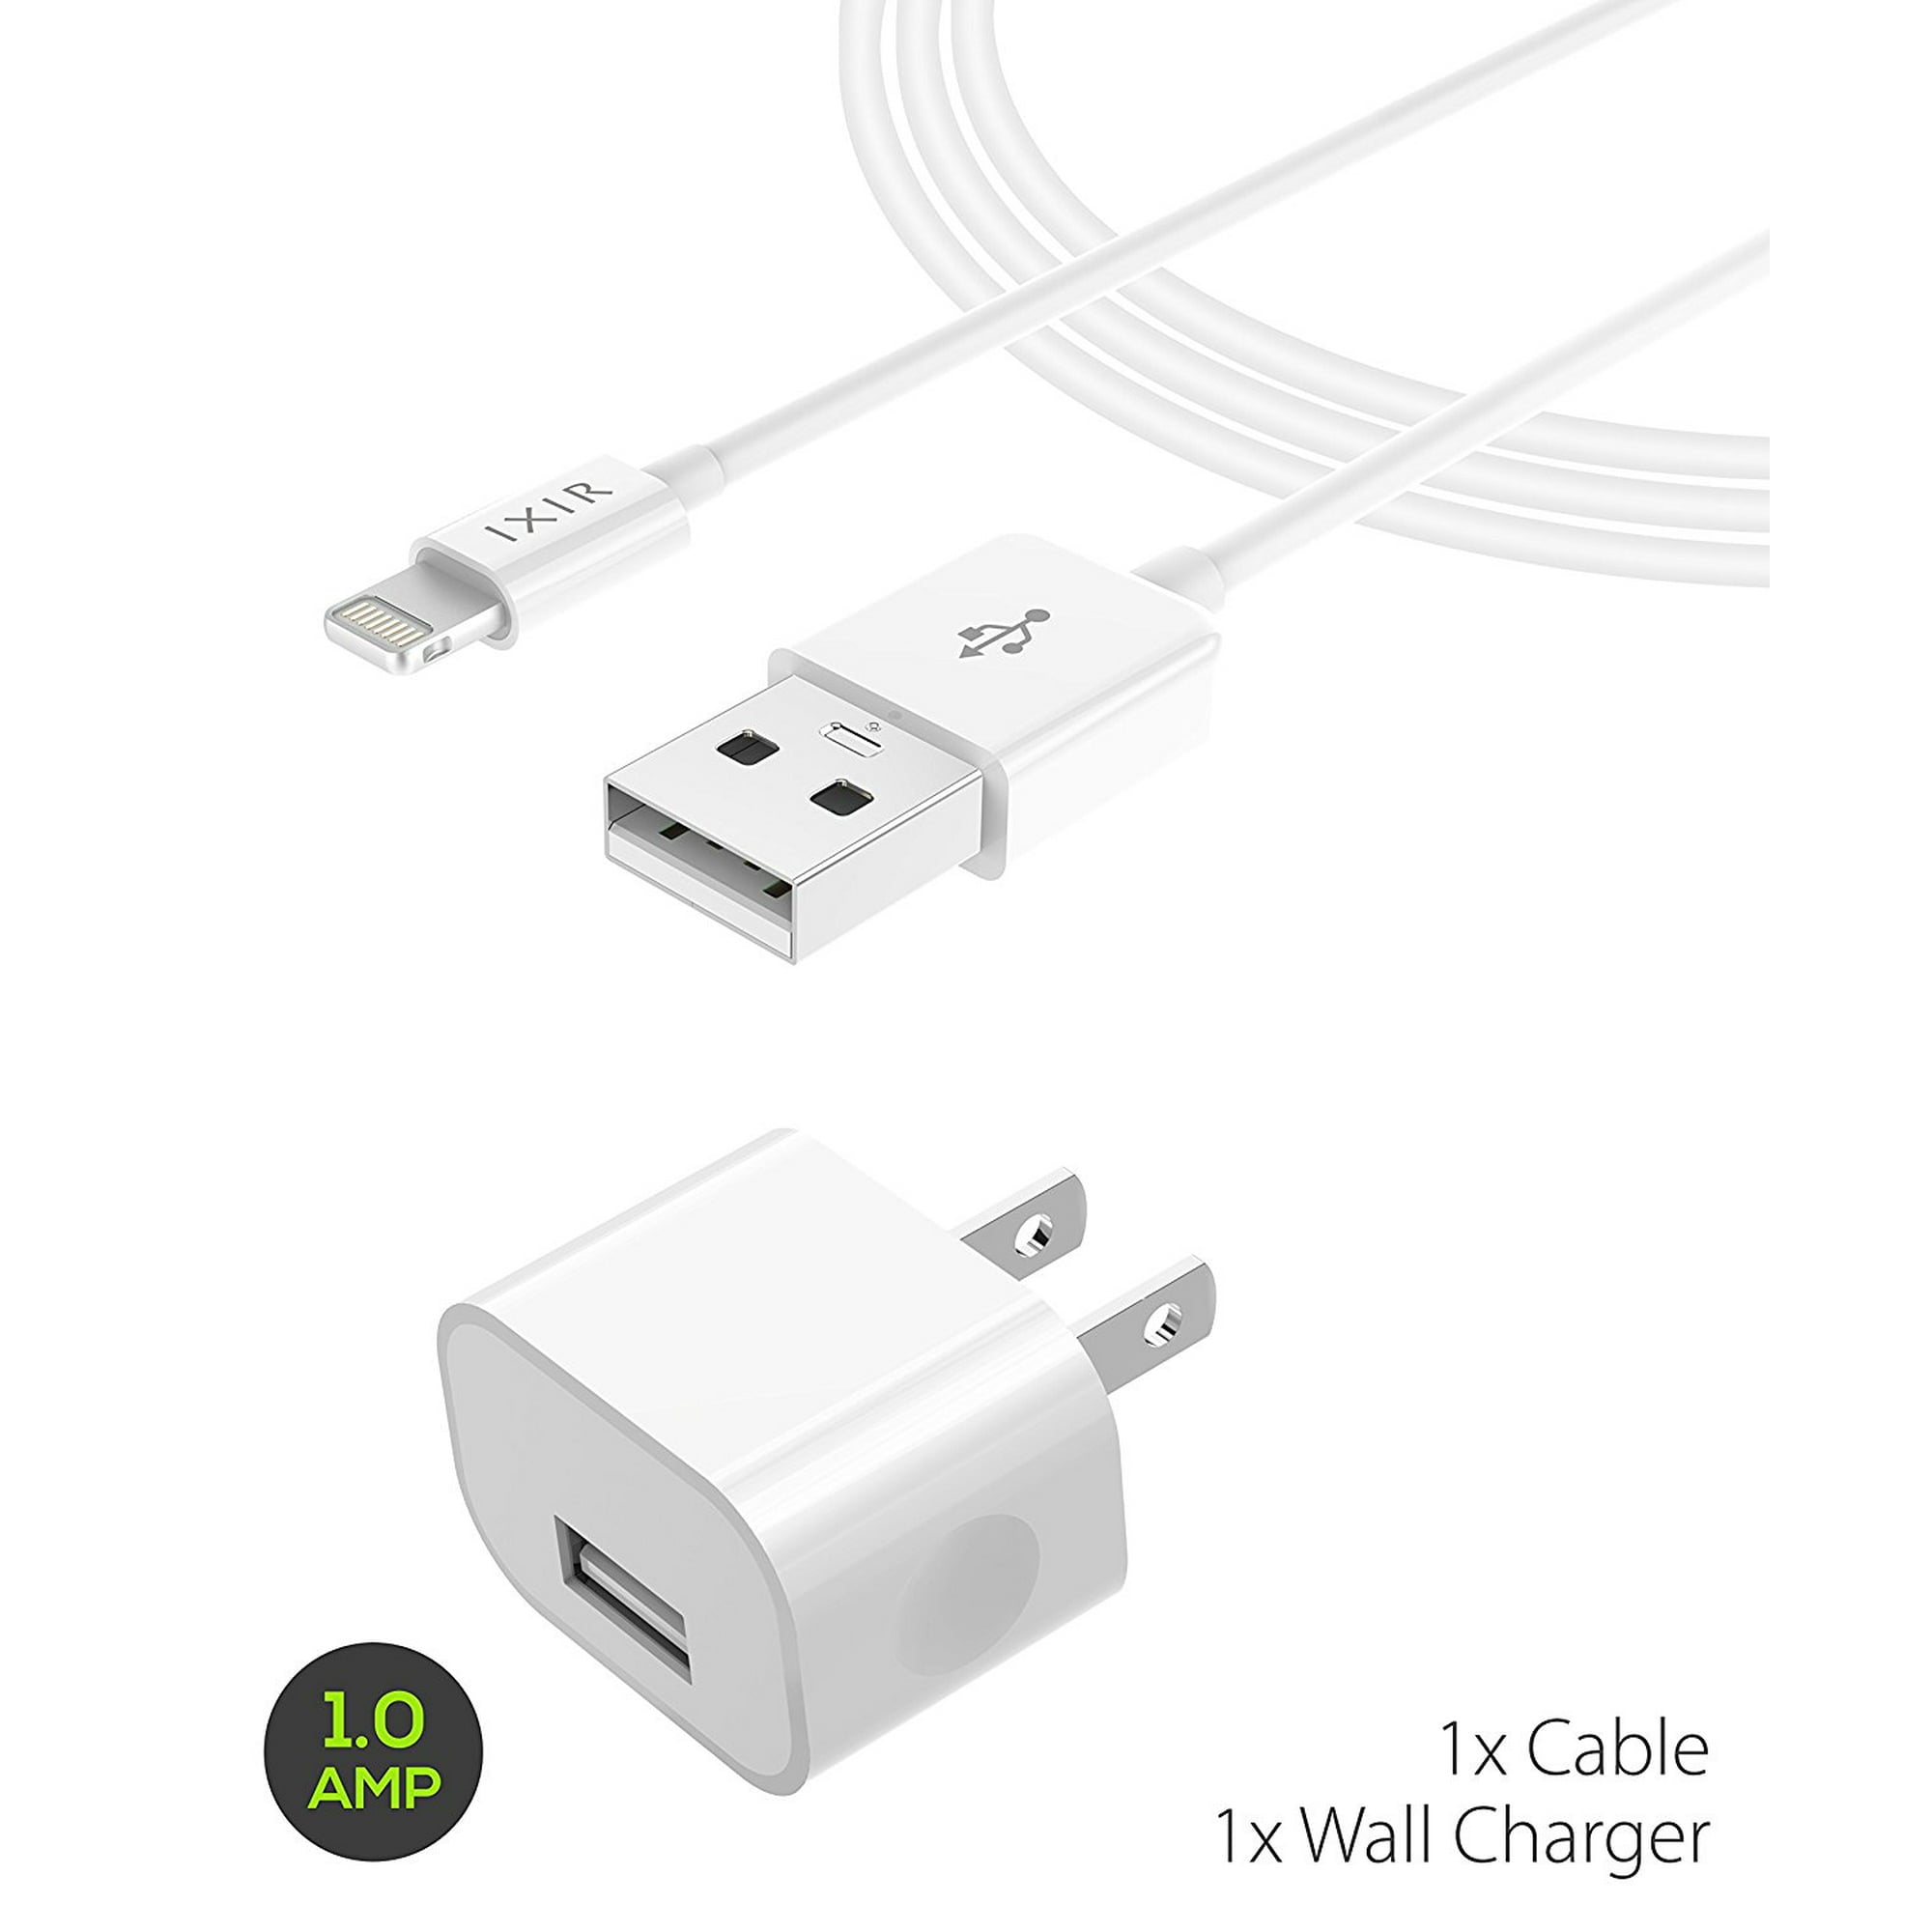 Nano 7th Charger Lightning Cable Kit Compatible with iPhone by Ixir - {1 Wall Charger 1 Cable}, USB Cables (White)